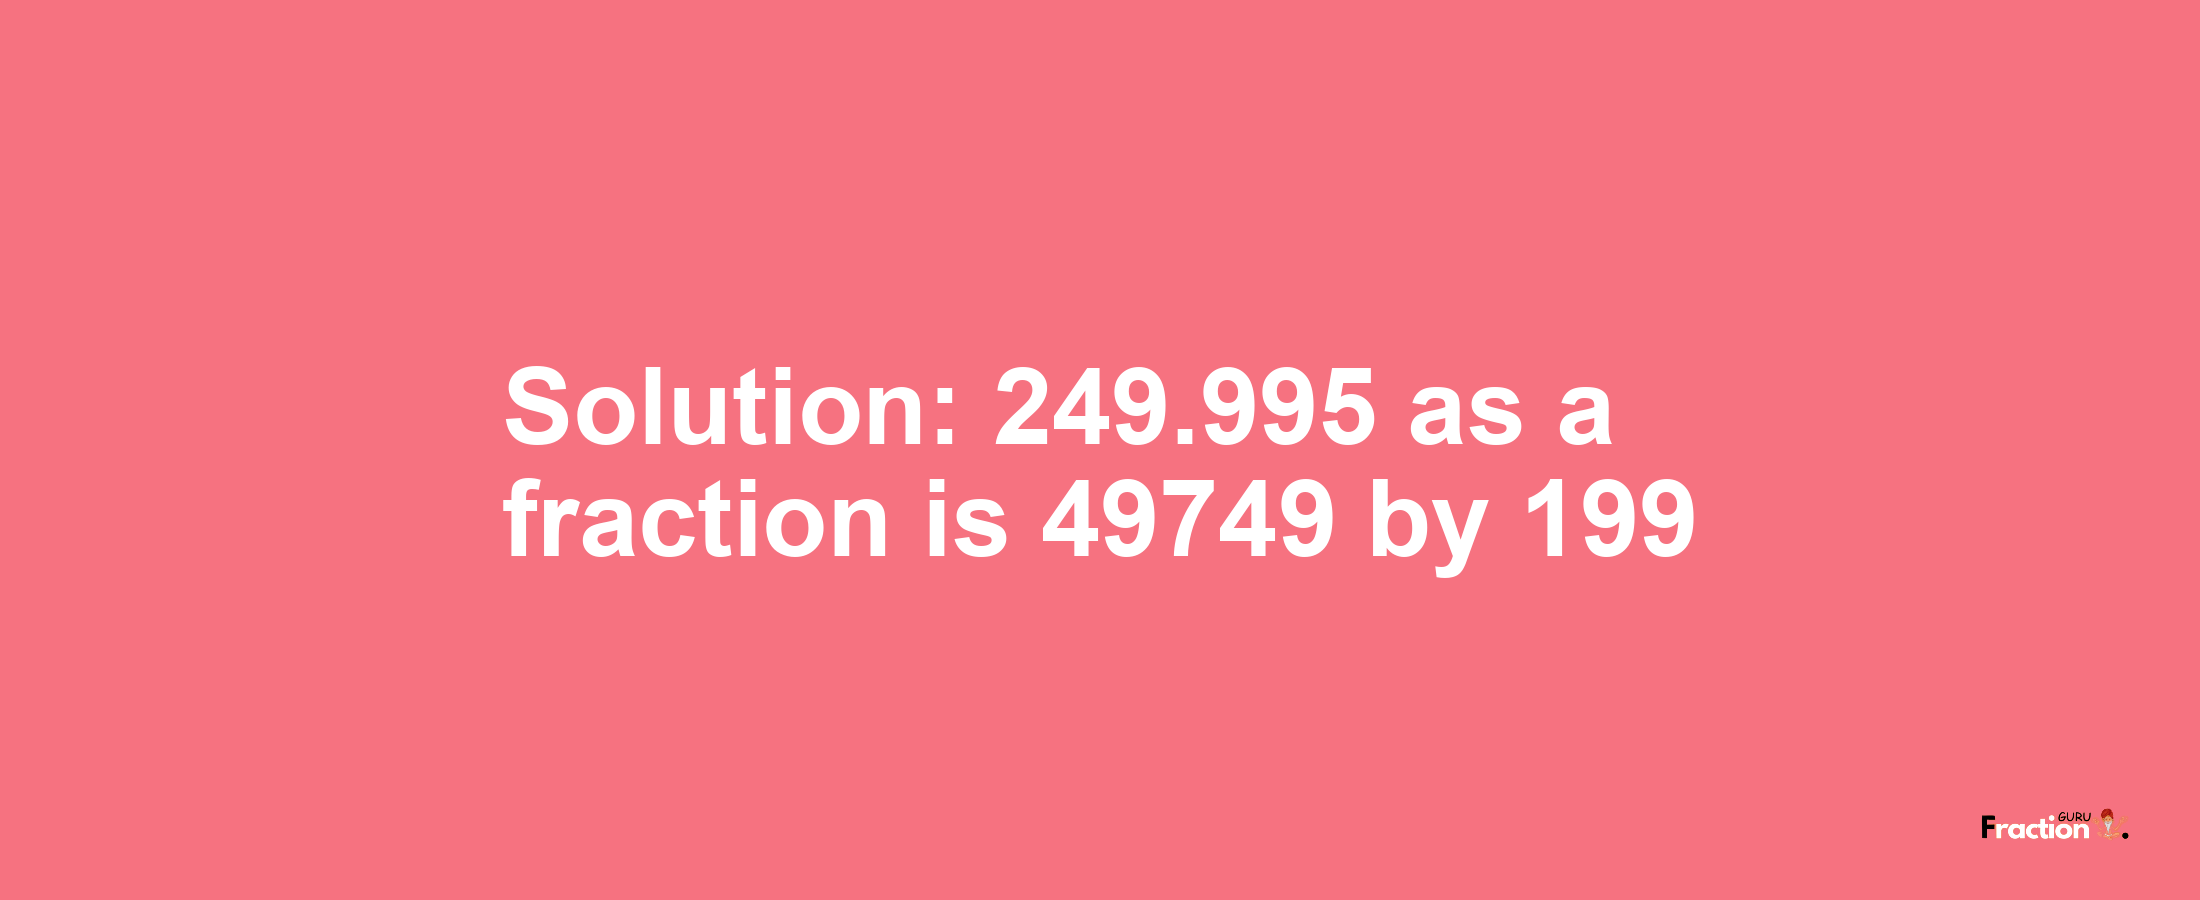 Solution:249.995 as a fraction is 49749/199